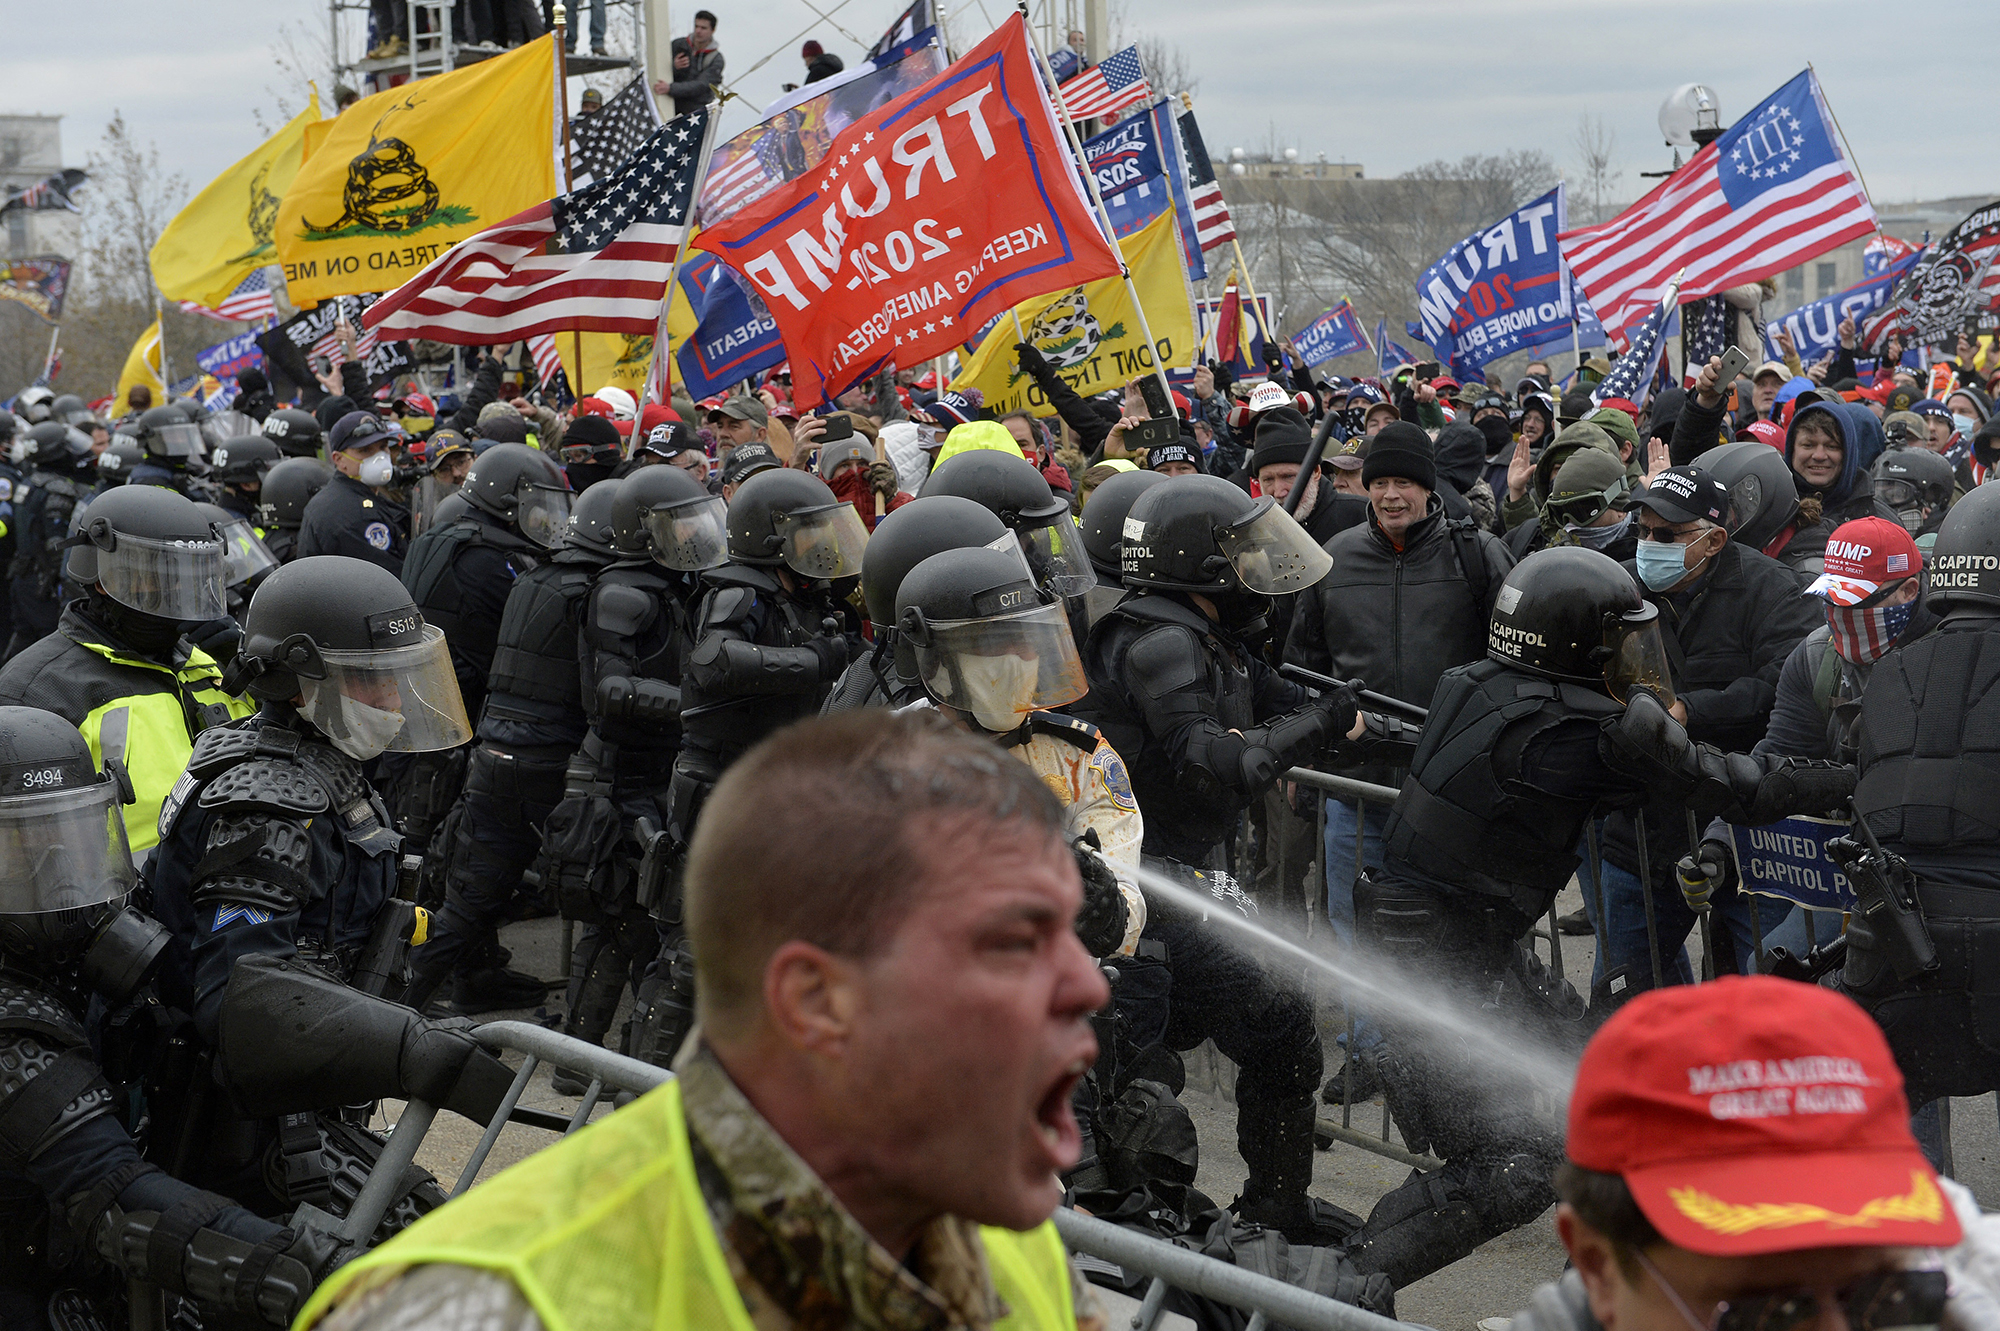 PHOTO: Trump supporters brandishing Three Percenter and other militia group flags clash with police and security forces as people try to storm the Capitol in Washington, Jan 6, 2021.